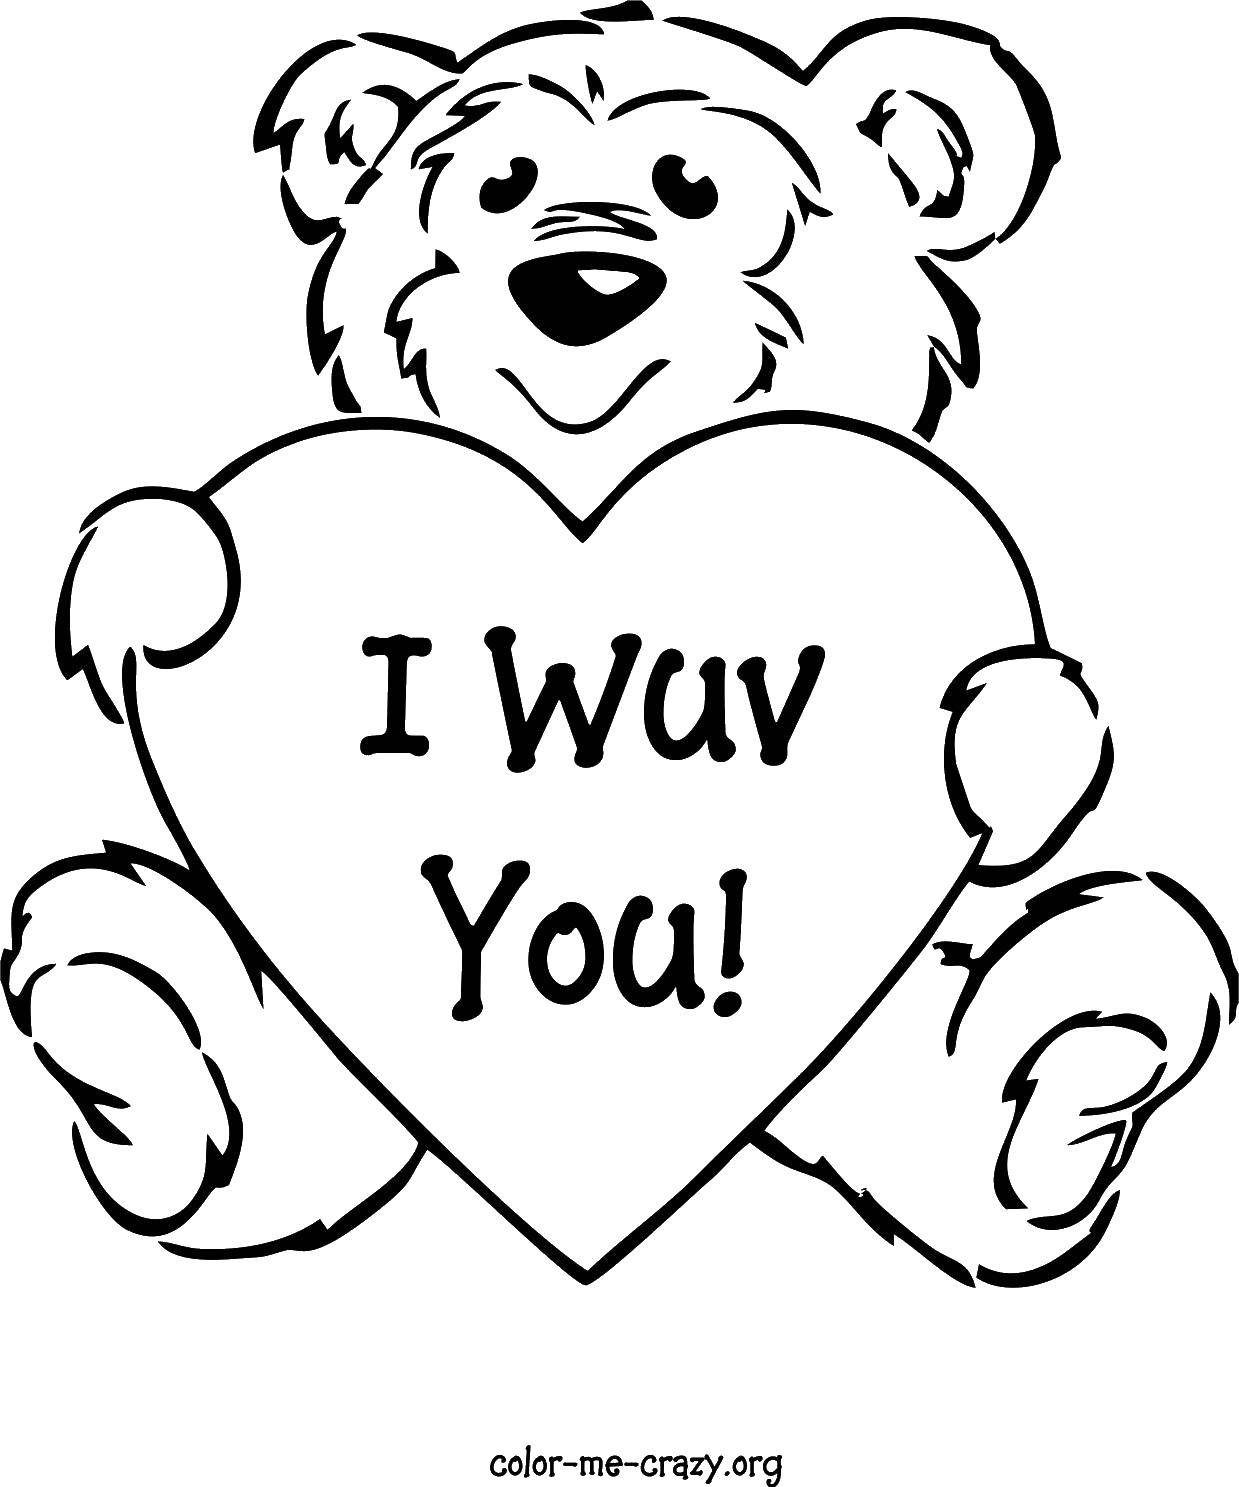 Coloring Bear with congratulations. Category Valentines day. Tags:  love, Valentines day.